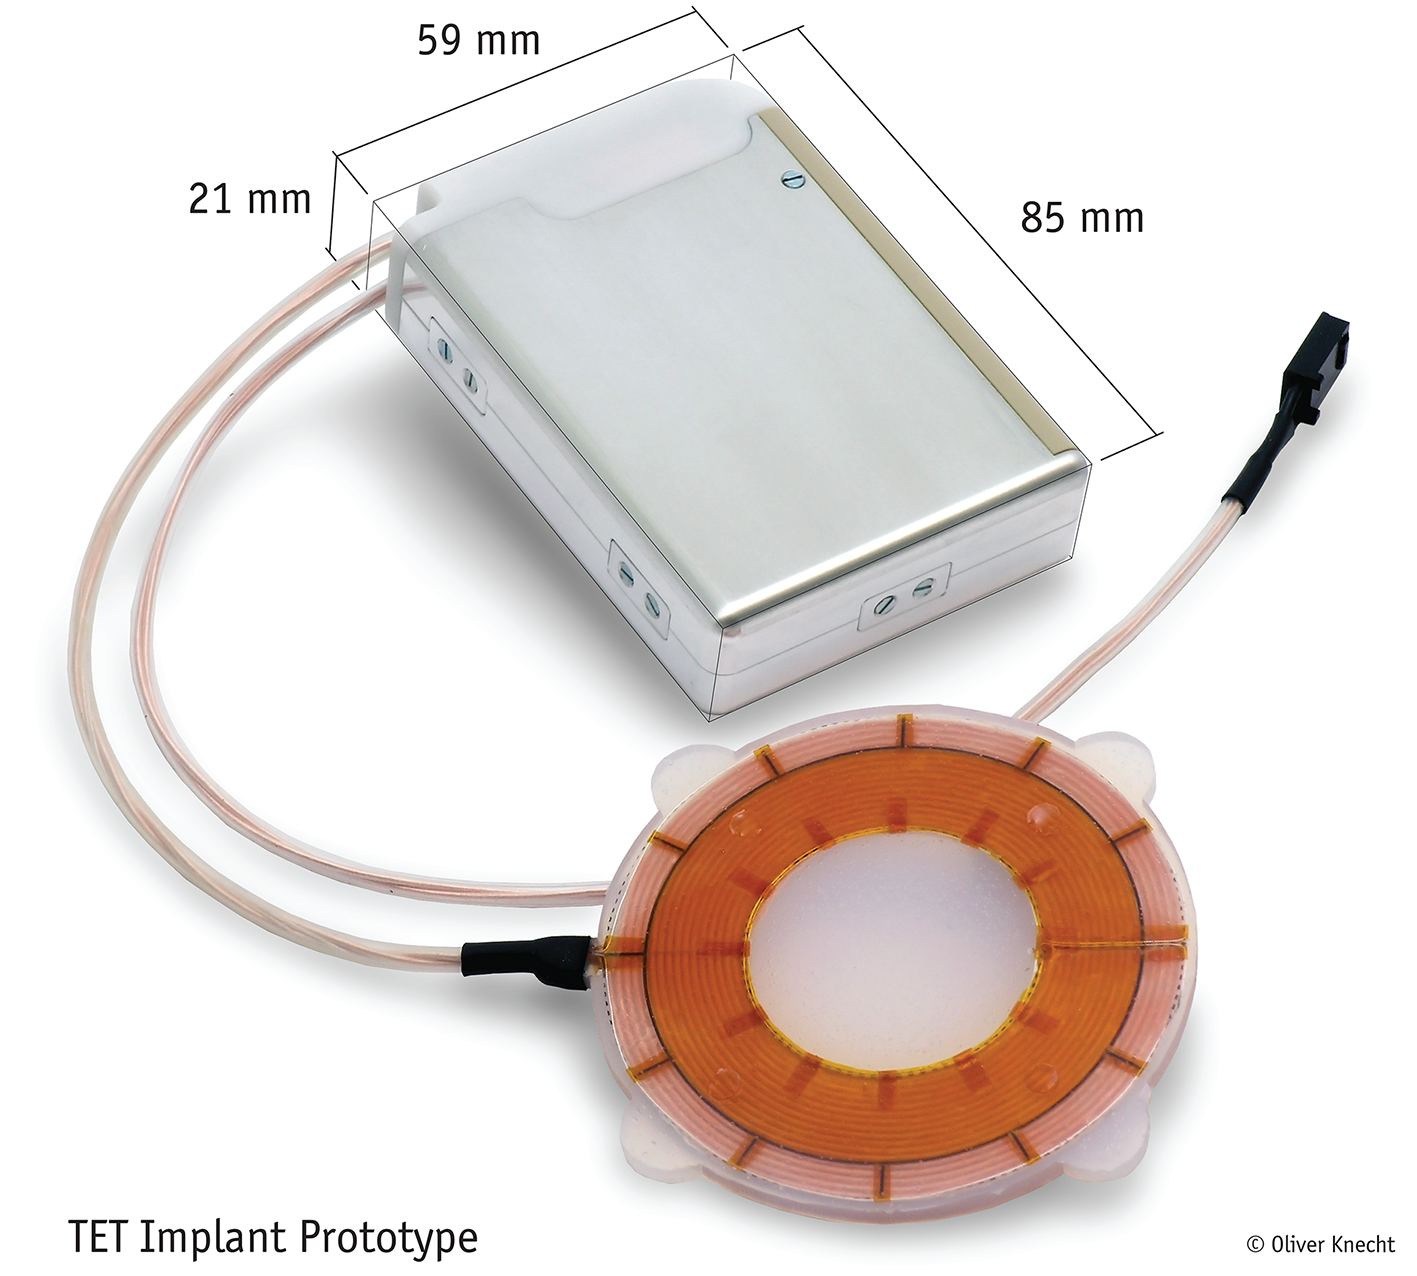 Prototype of an implant implementing wireless energy transfer